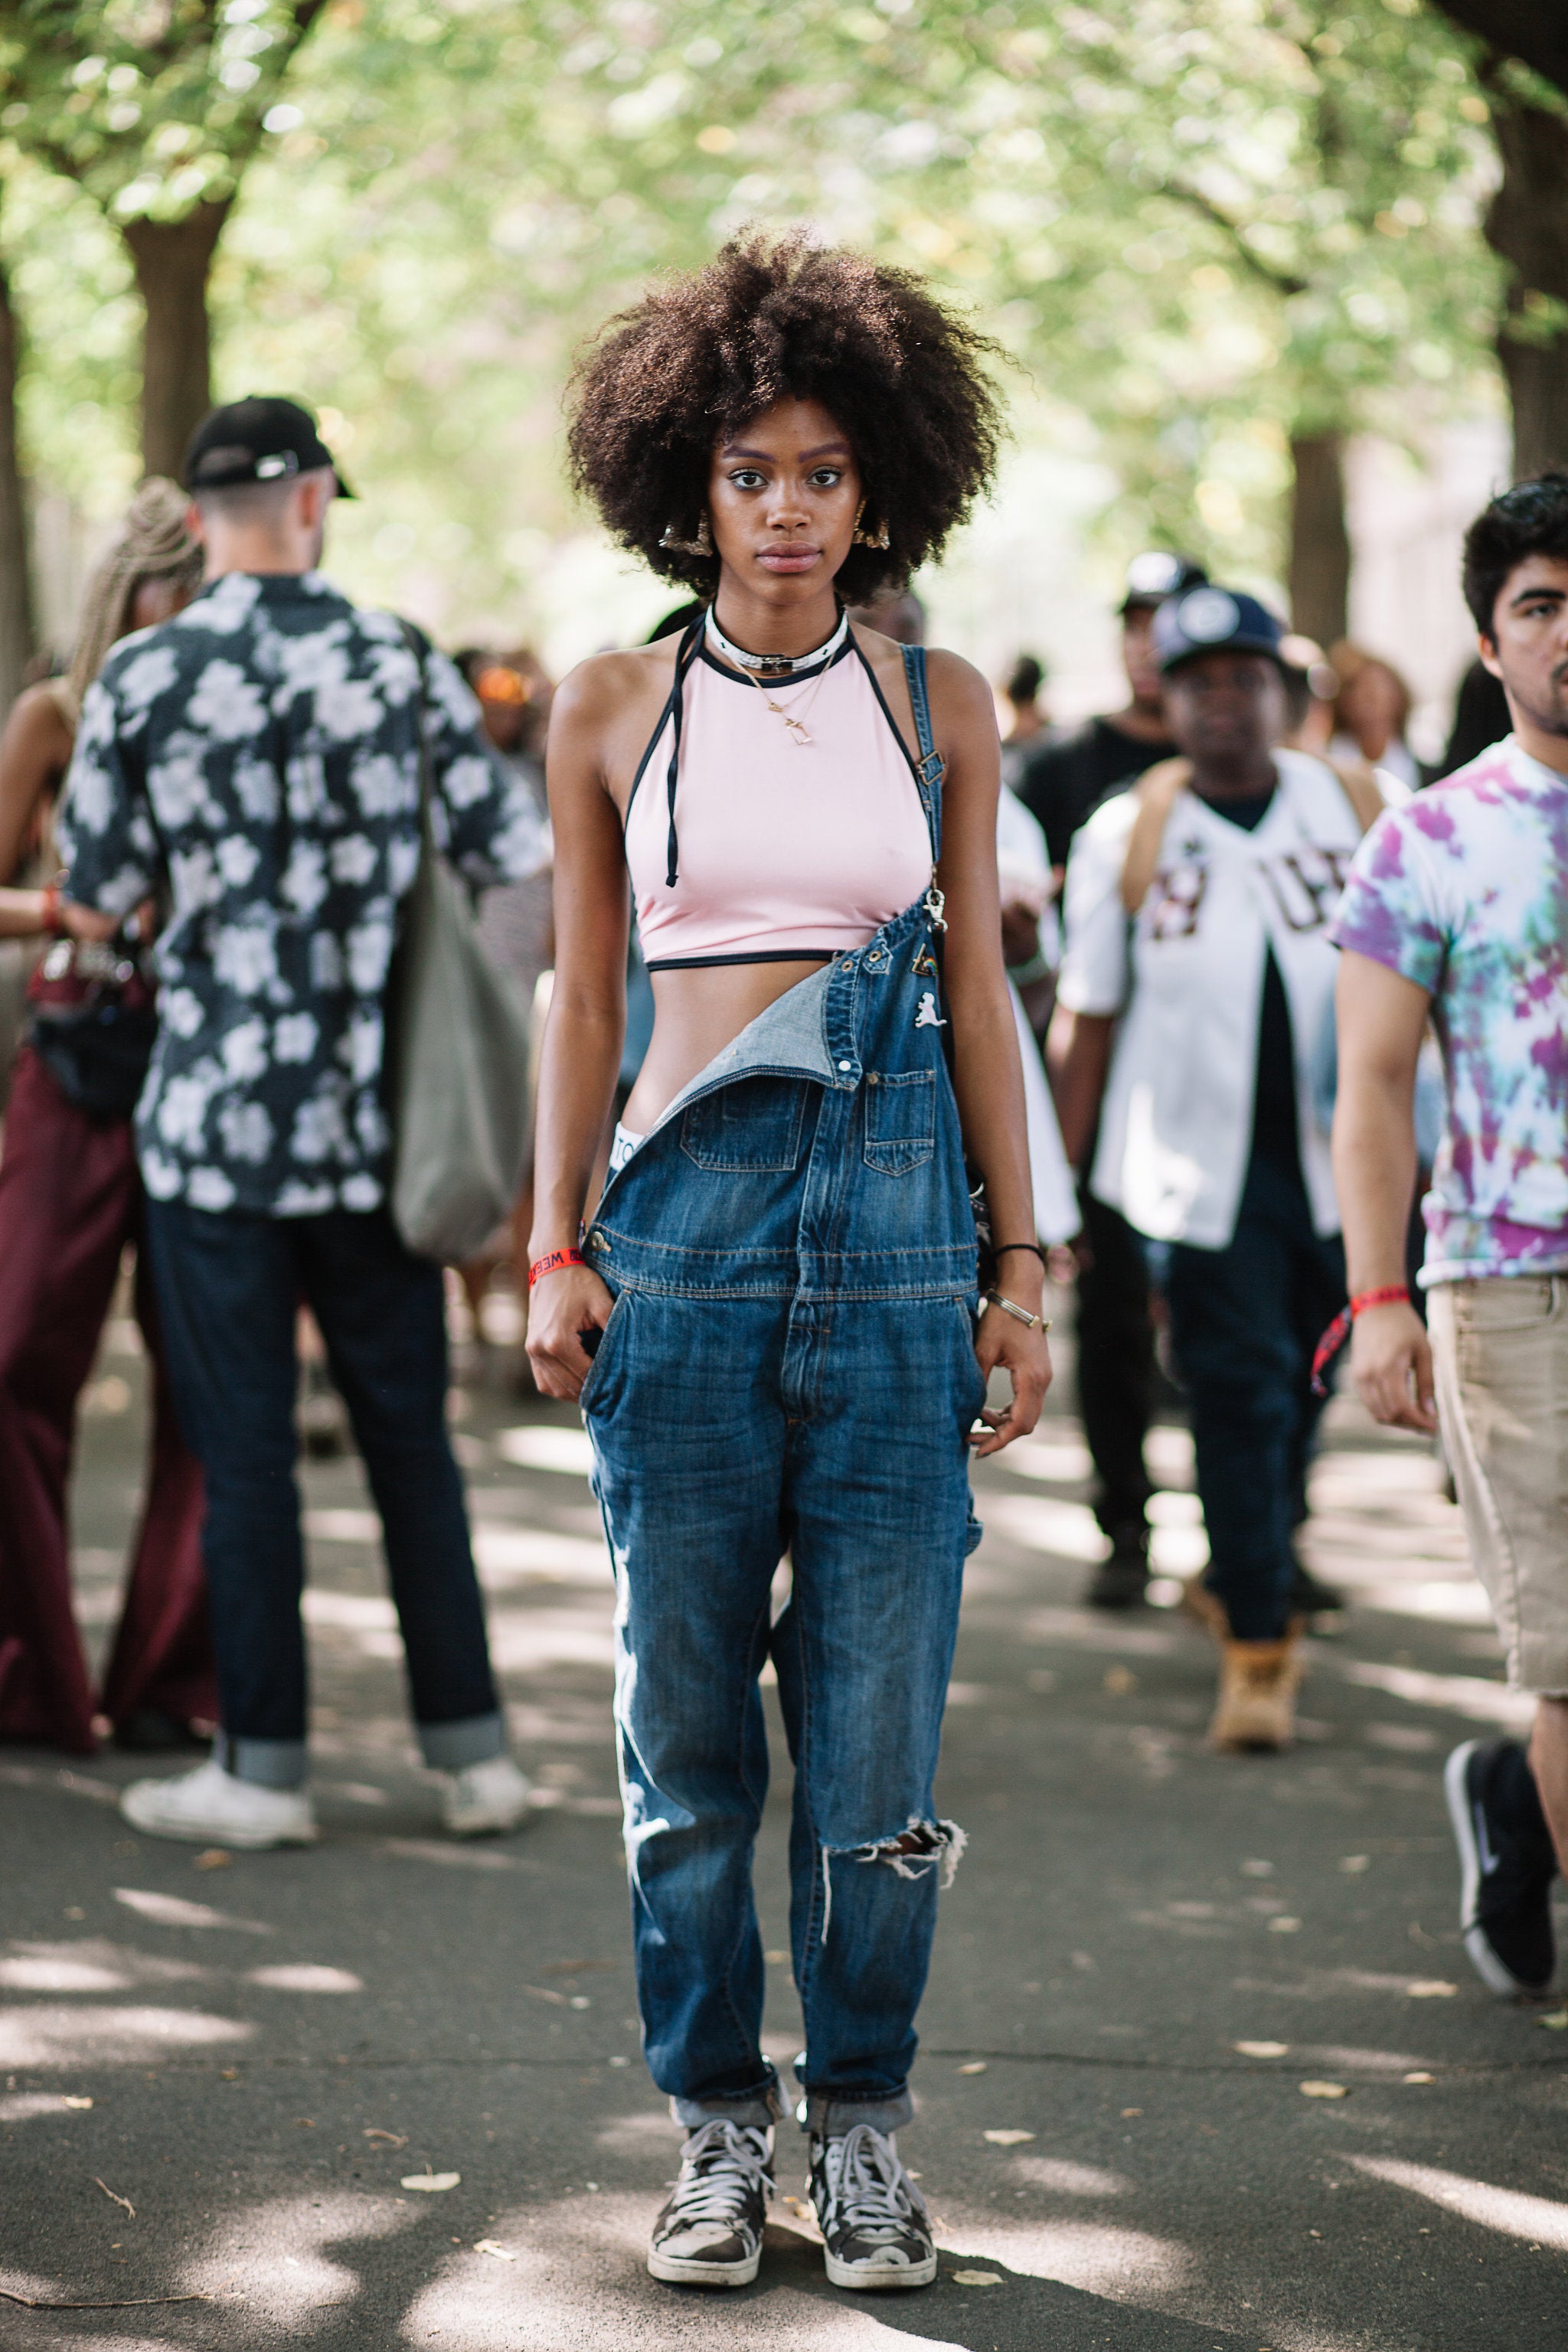 These Afropunk Princesses Will Give You So Much Life
